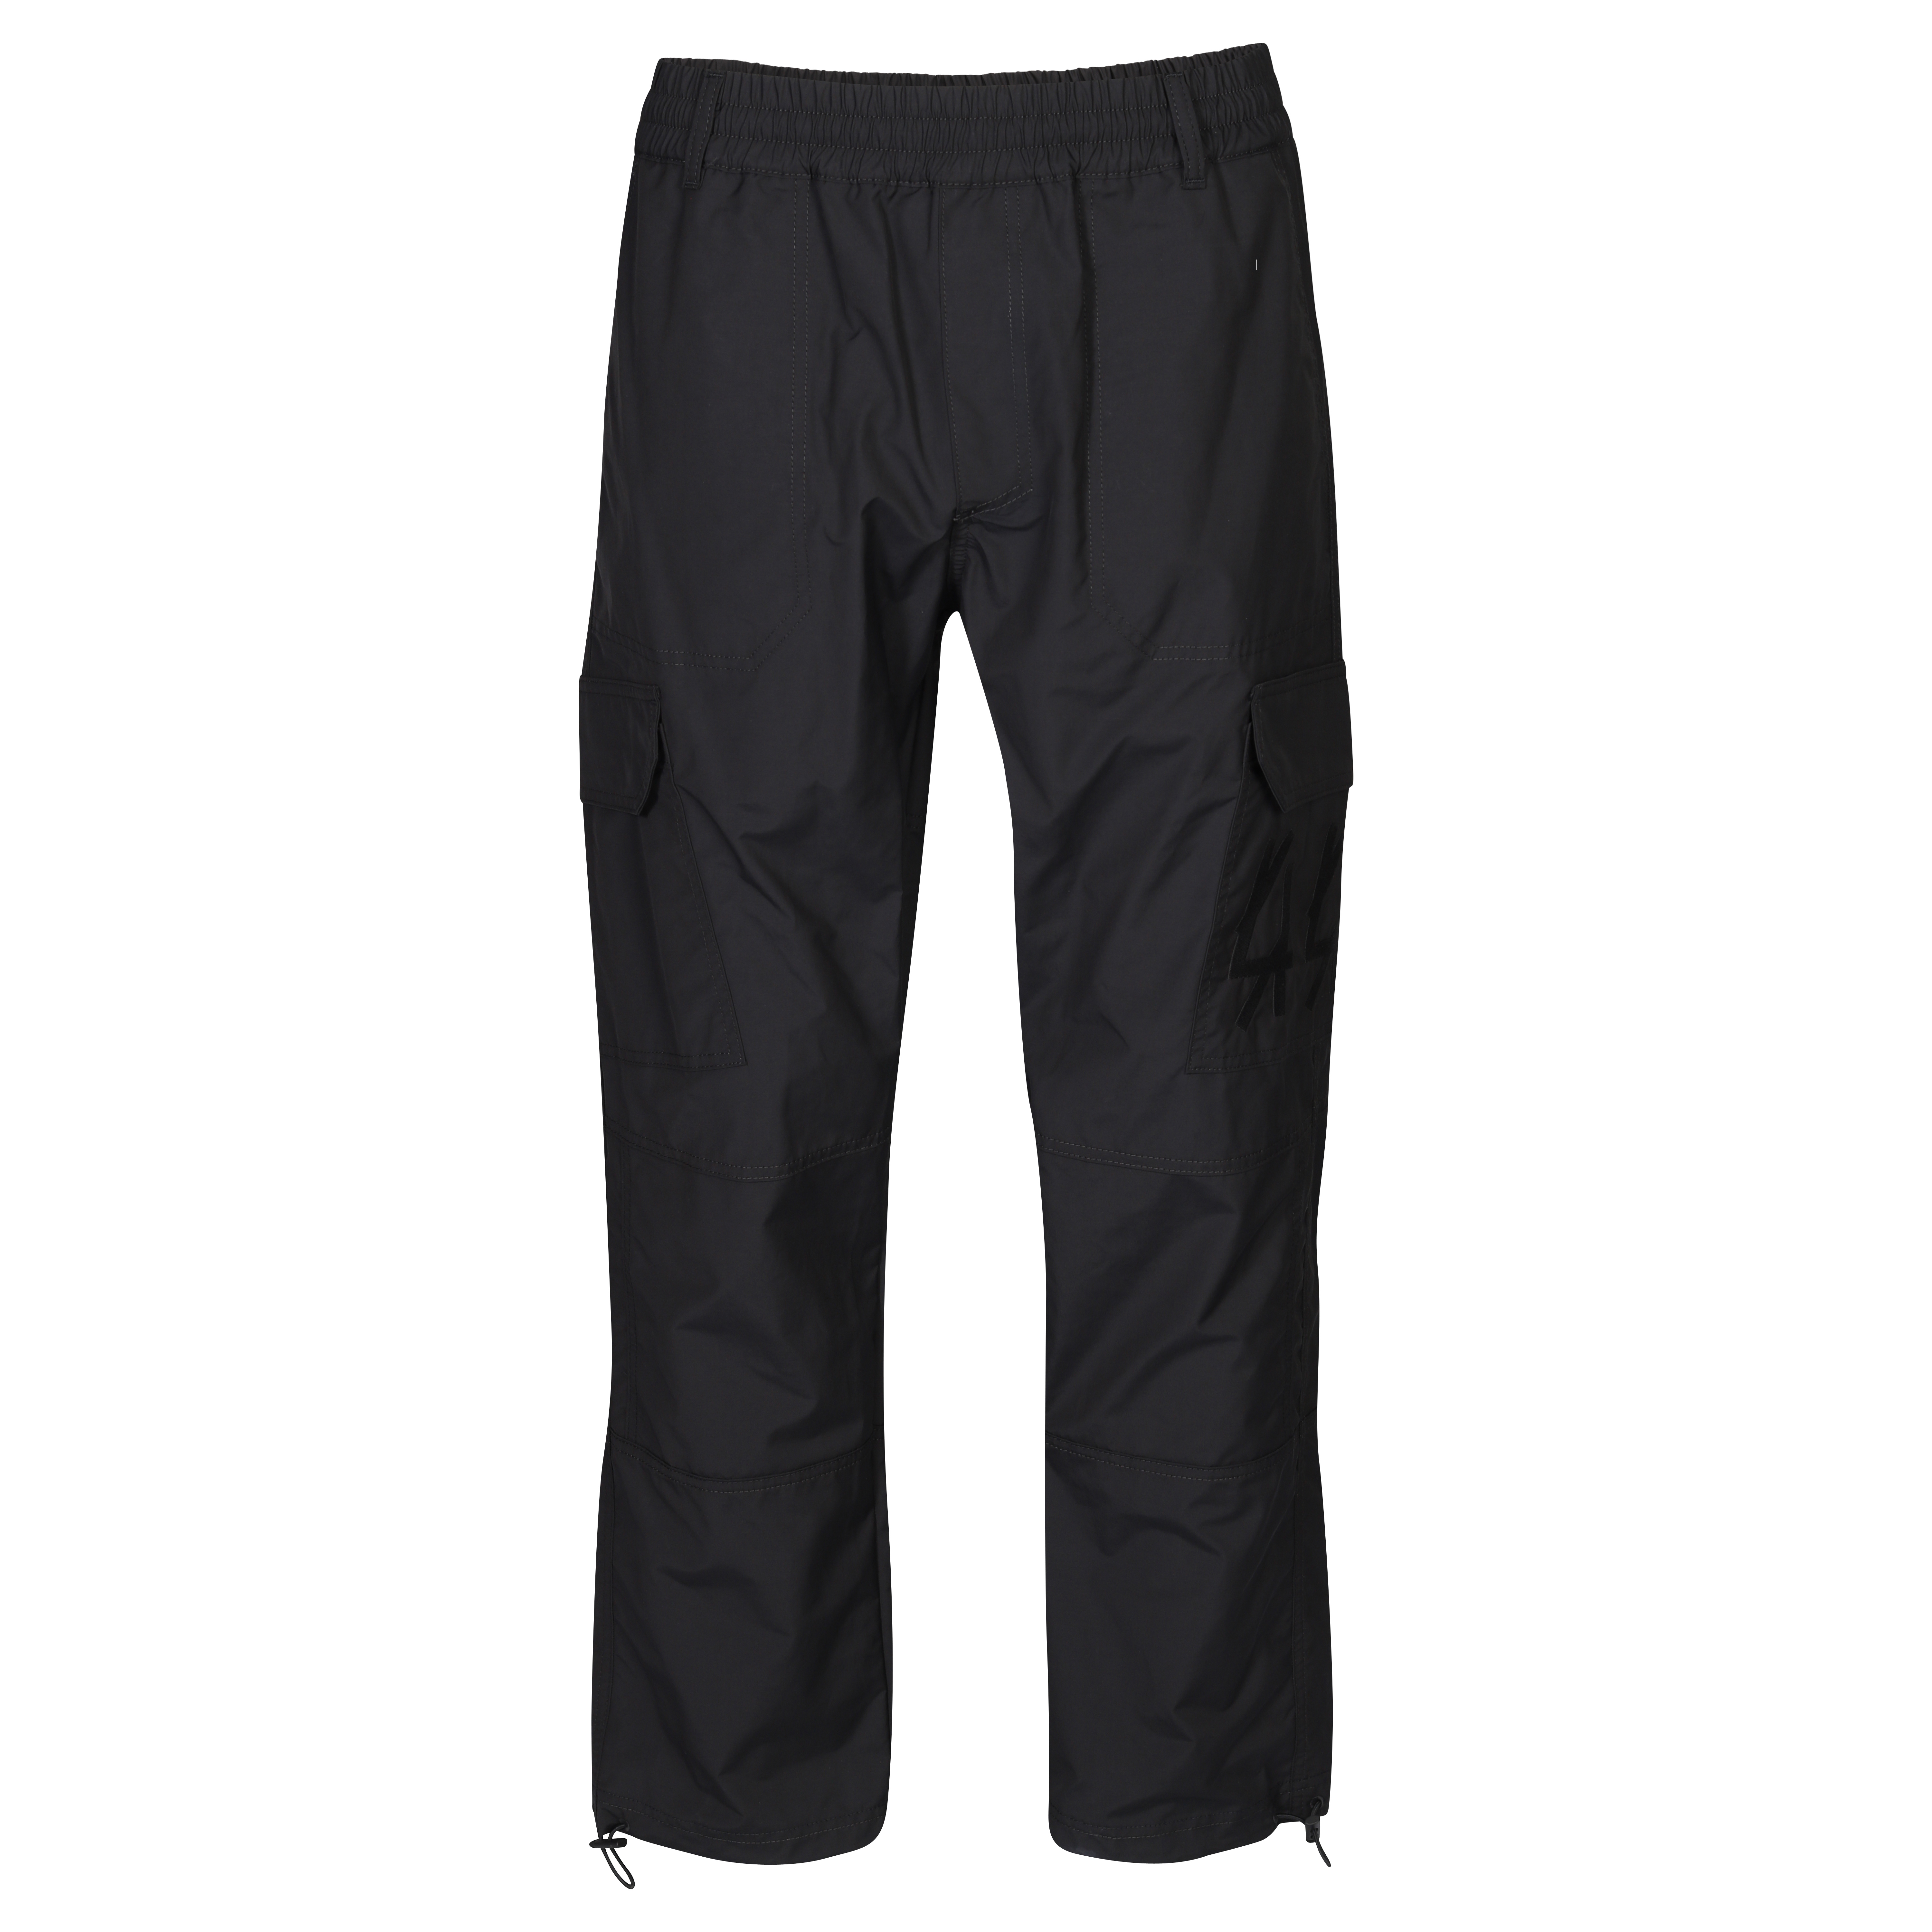 44 Label Group Think Solid Cargo Trousers in Black